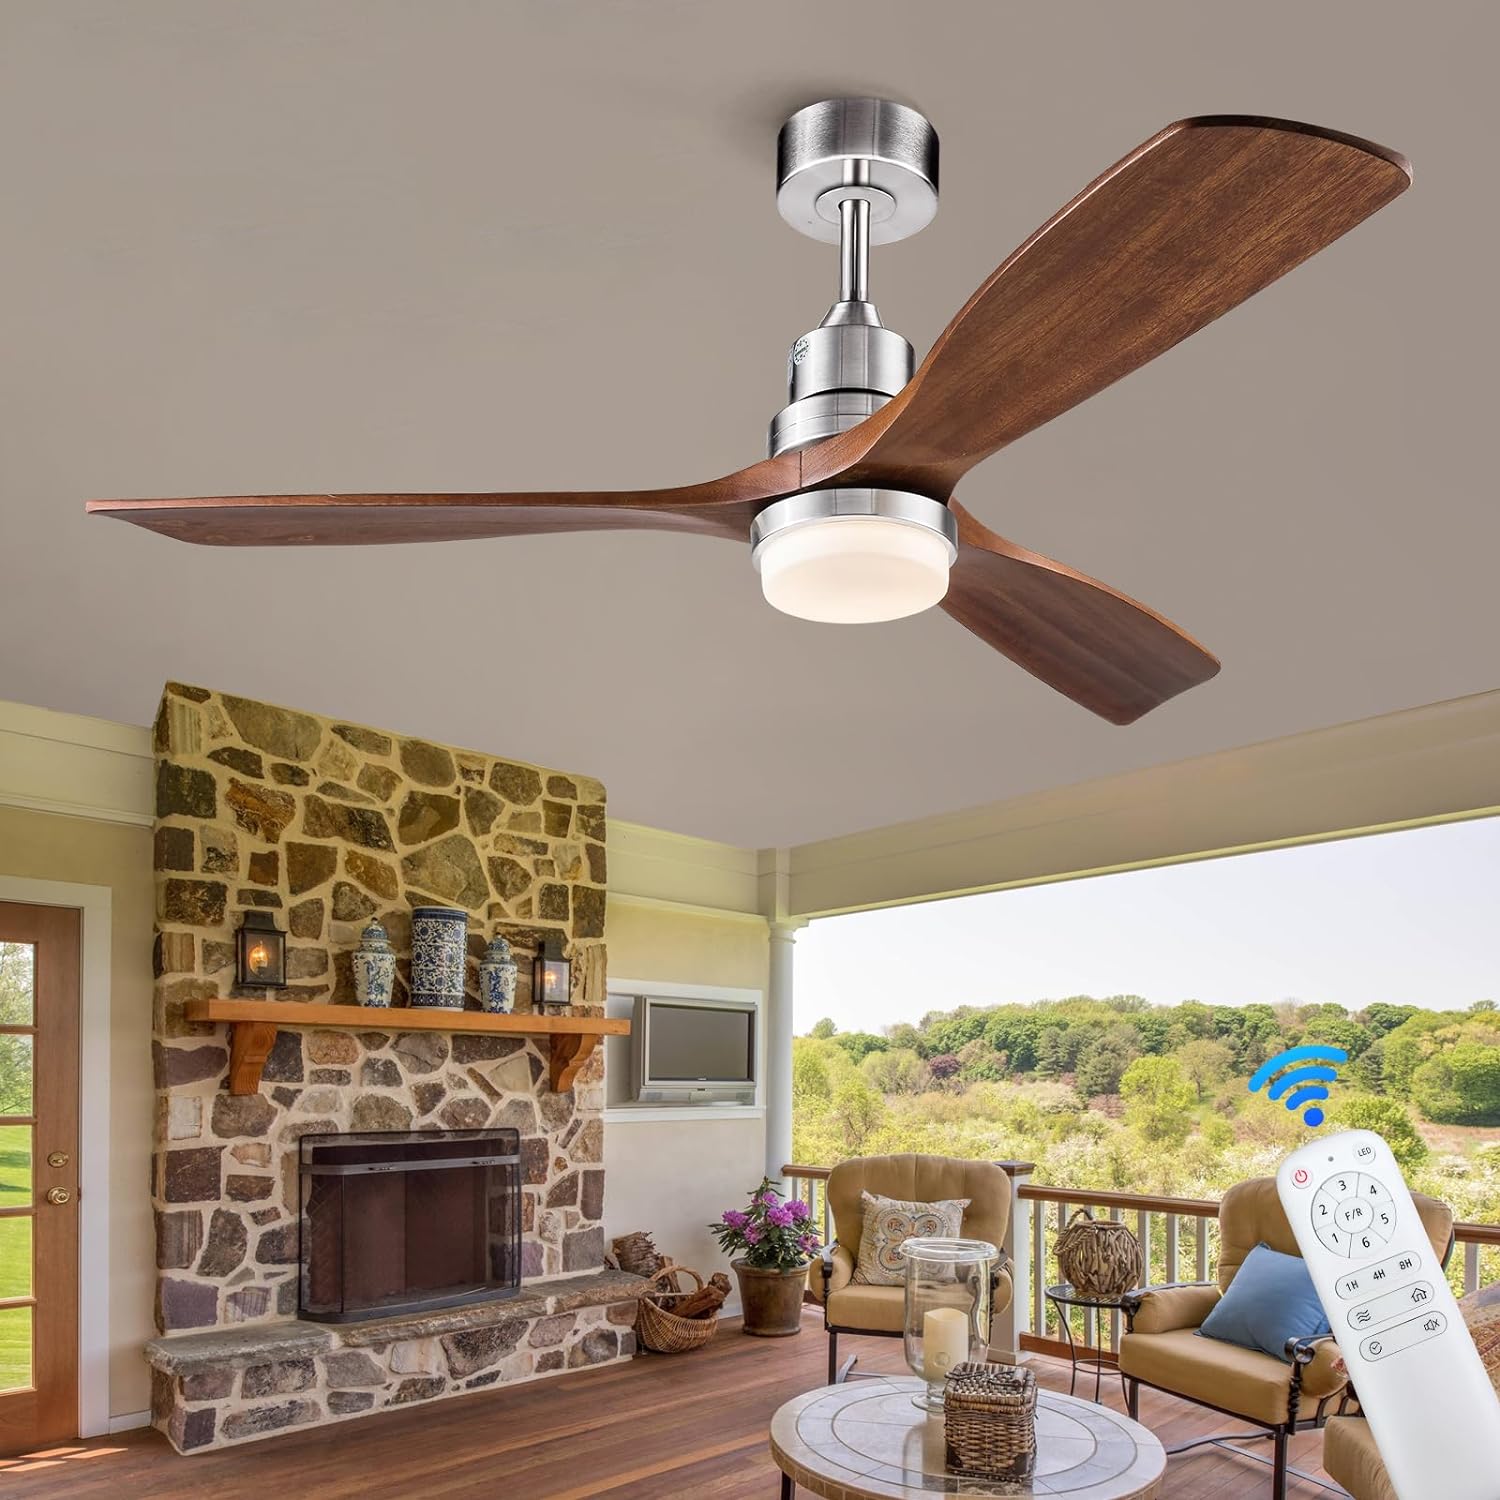 BOJUE 52 wood Ceiling fans with lights,Indoor Outdoor Black Ceiling with 3 Blade Fan and 3 Down-rods Reversible DC Motor for Patio, Living Room,Bedroom,Office,Summer House,Etc